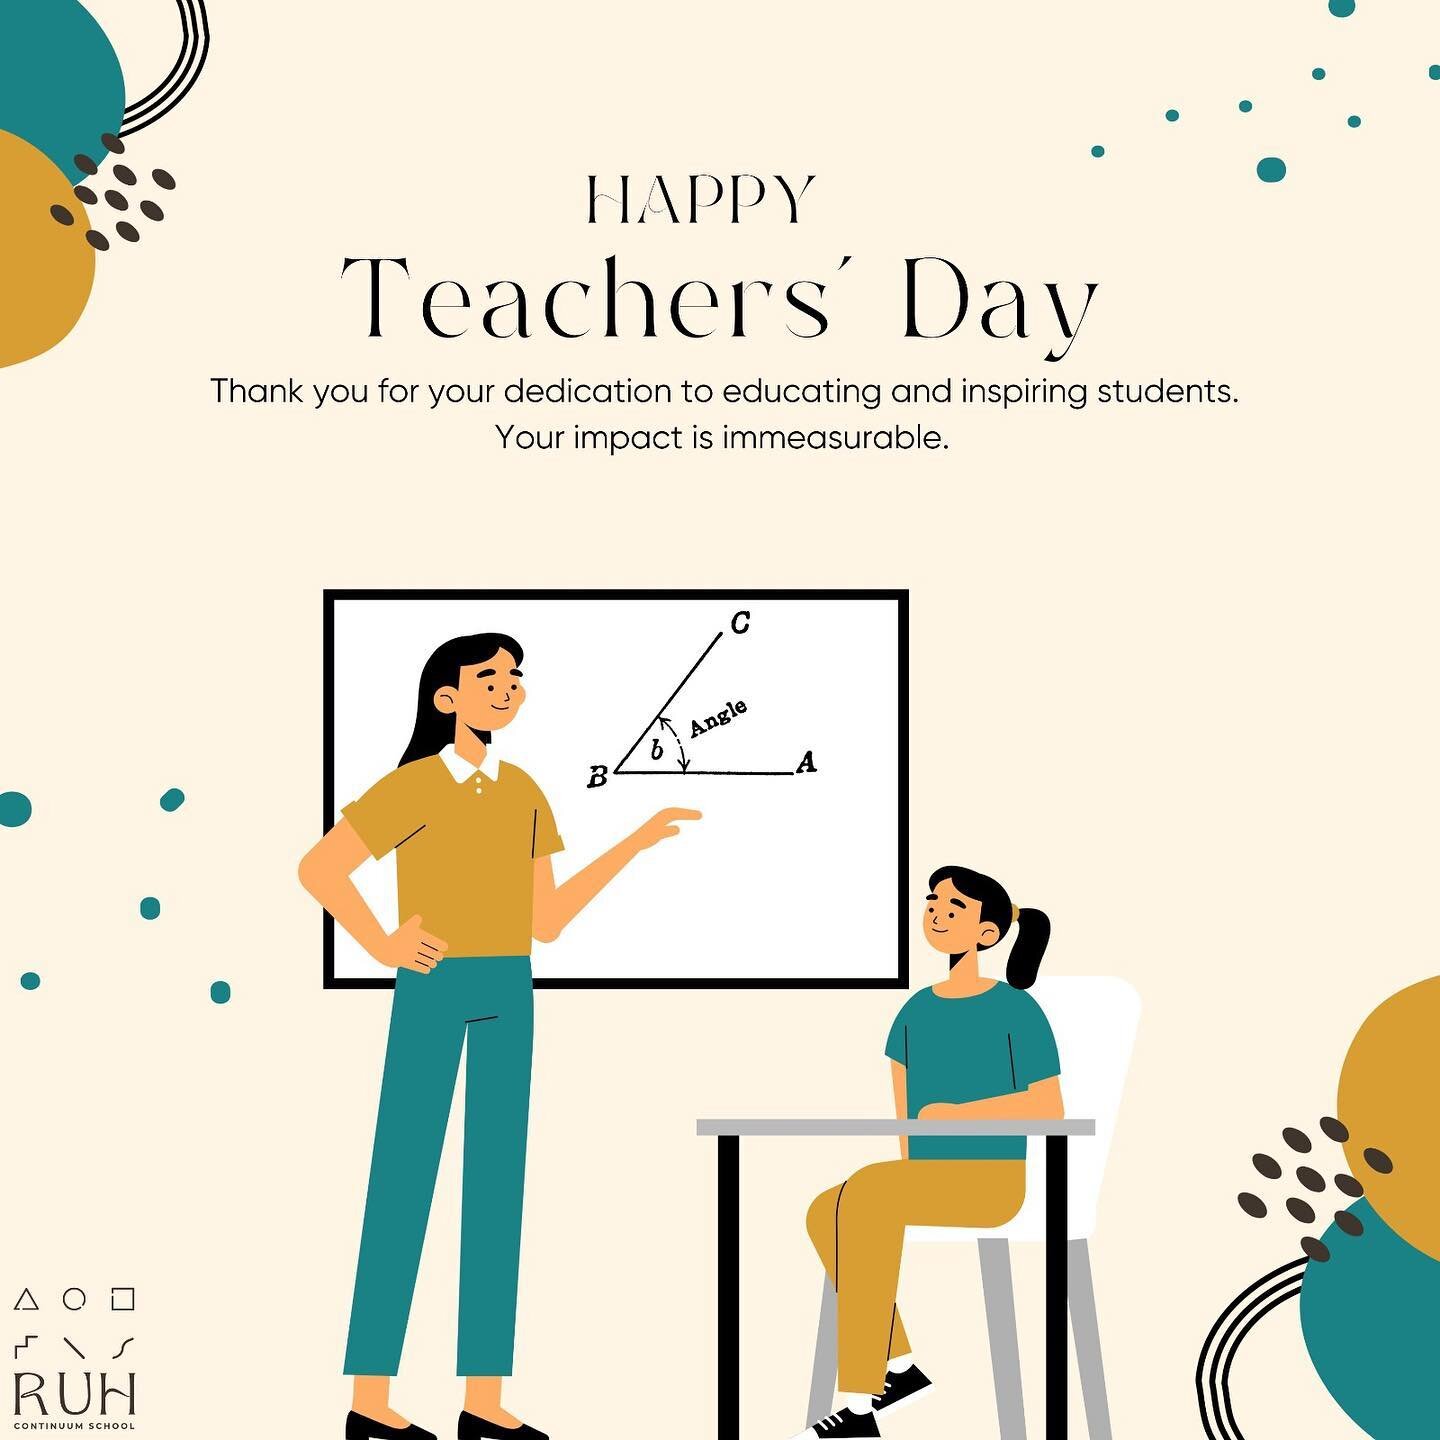 Dear Teachers,

Your dedication, passion, and guidance are what shape the future generations. On this Teachers Day, we express our heartfelt gratitude for your tireless effort and unwavering commitment. You are the guiding light that inspires, motiva